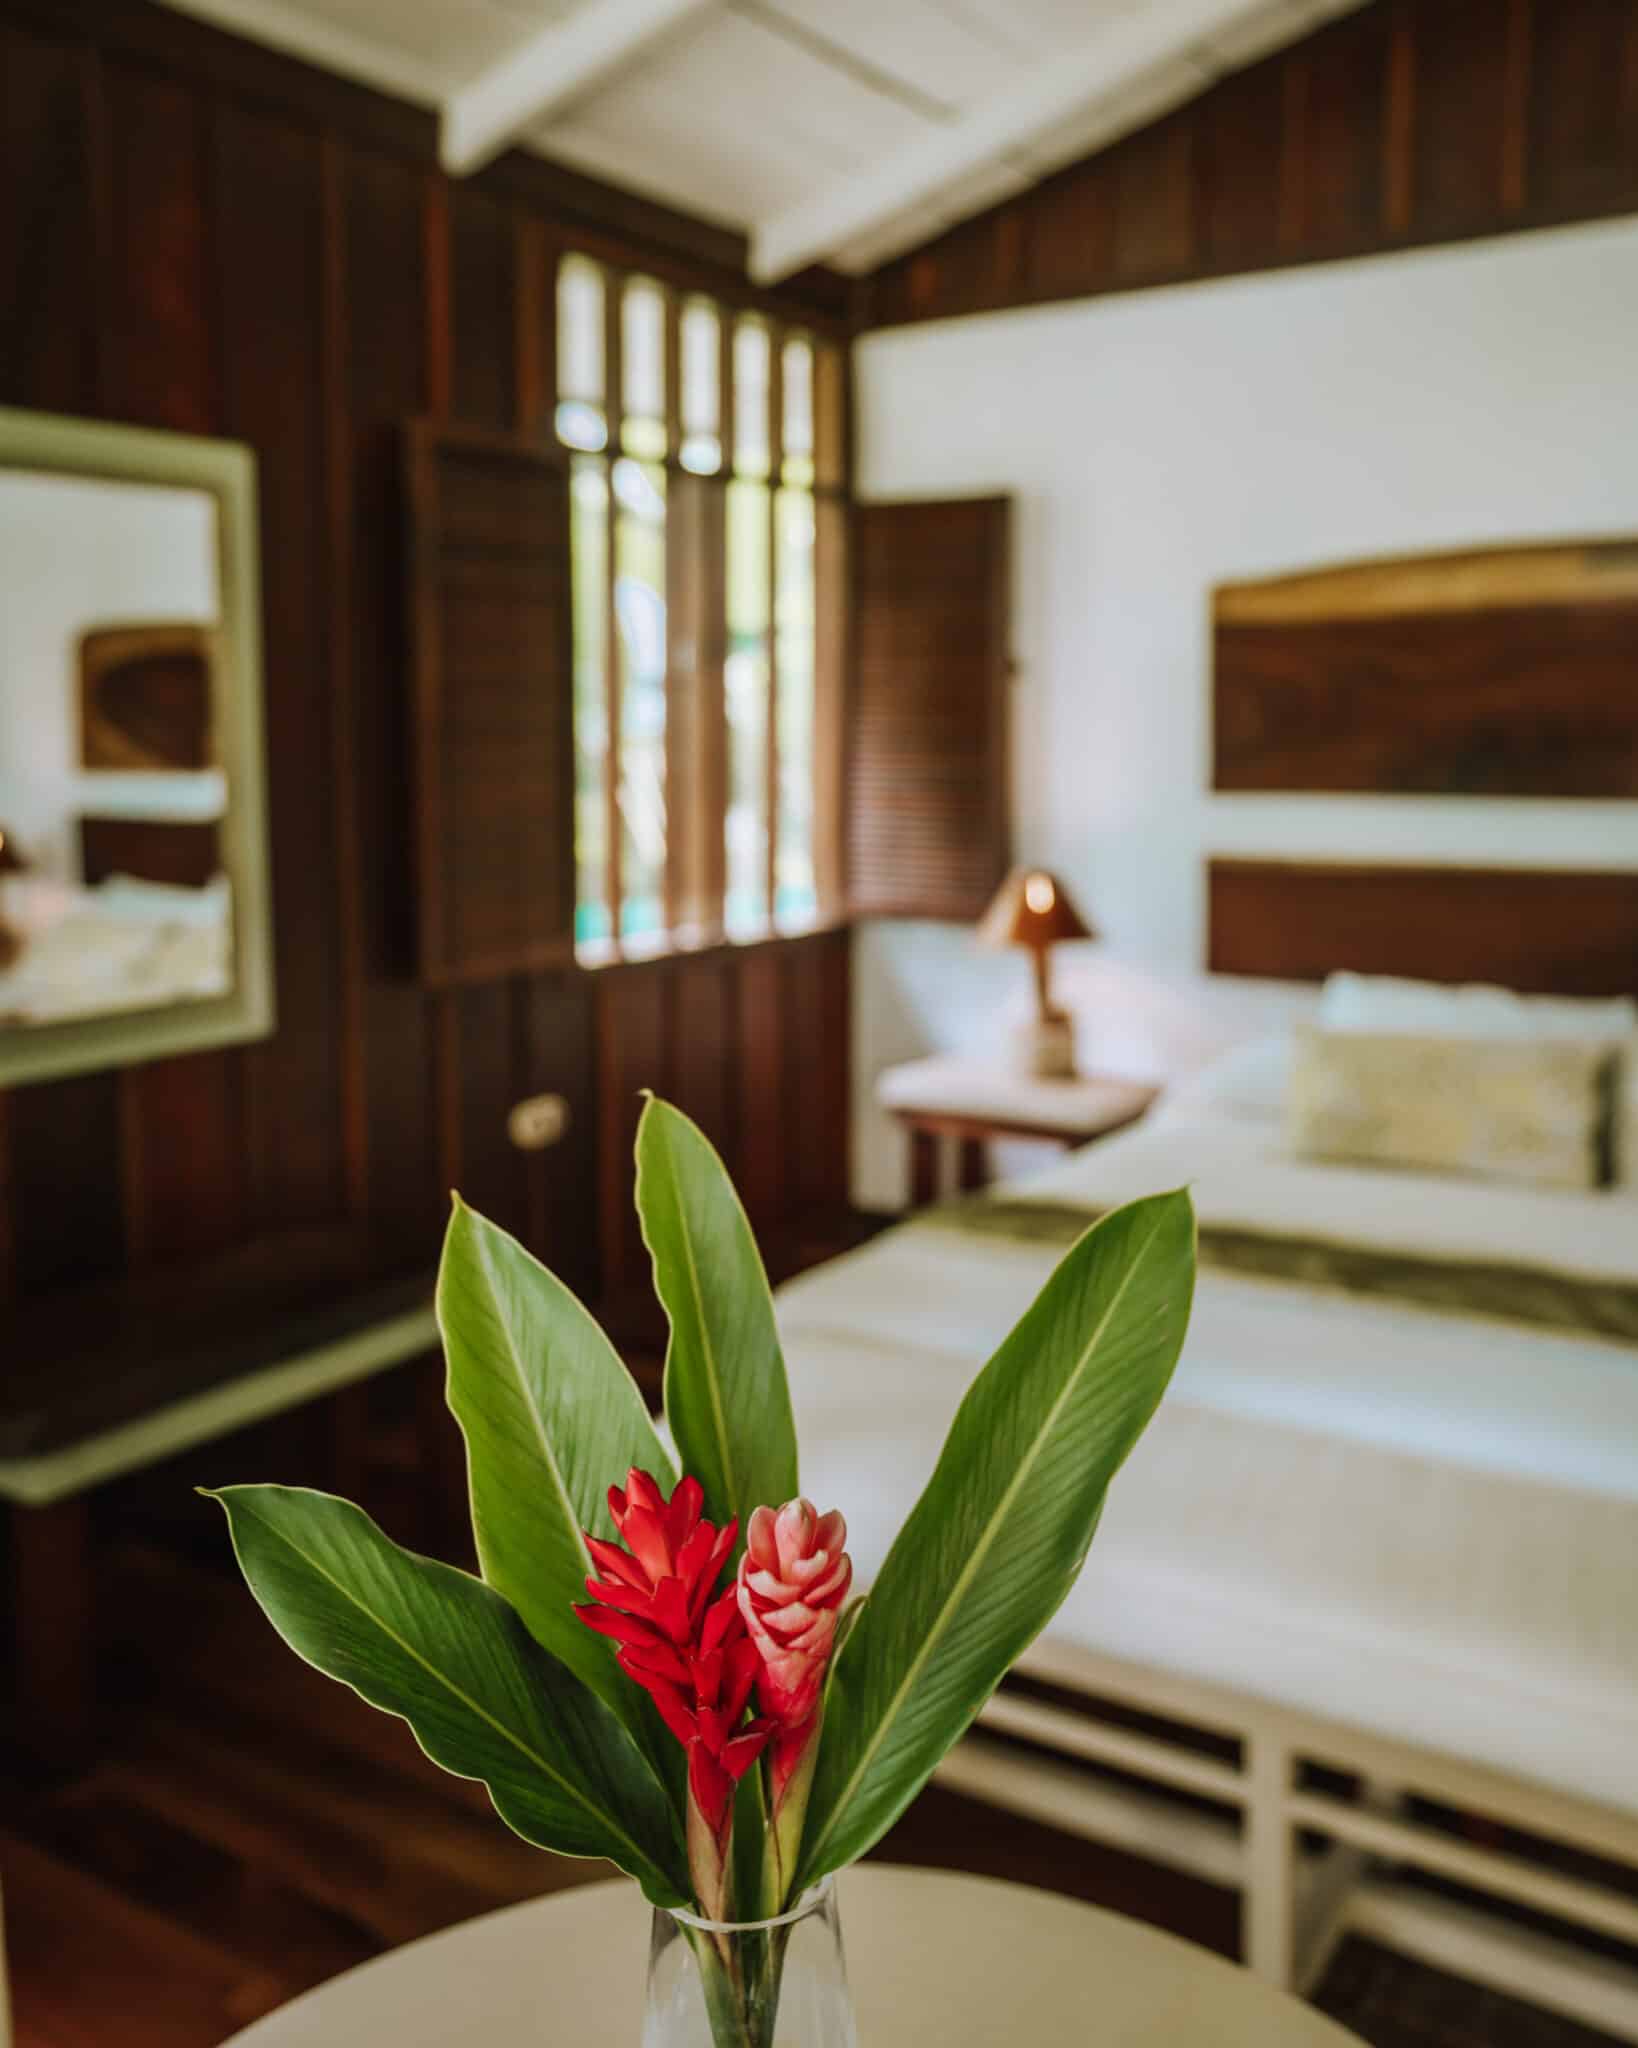 A bed in a room with a flower in a vase in Tortuguero, Costa Rica.